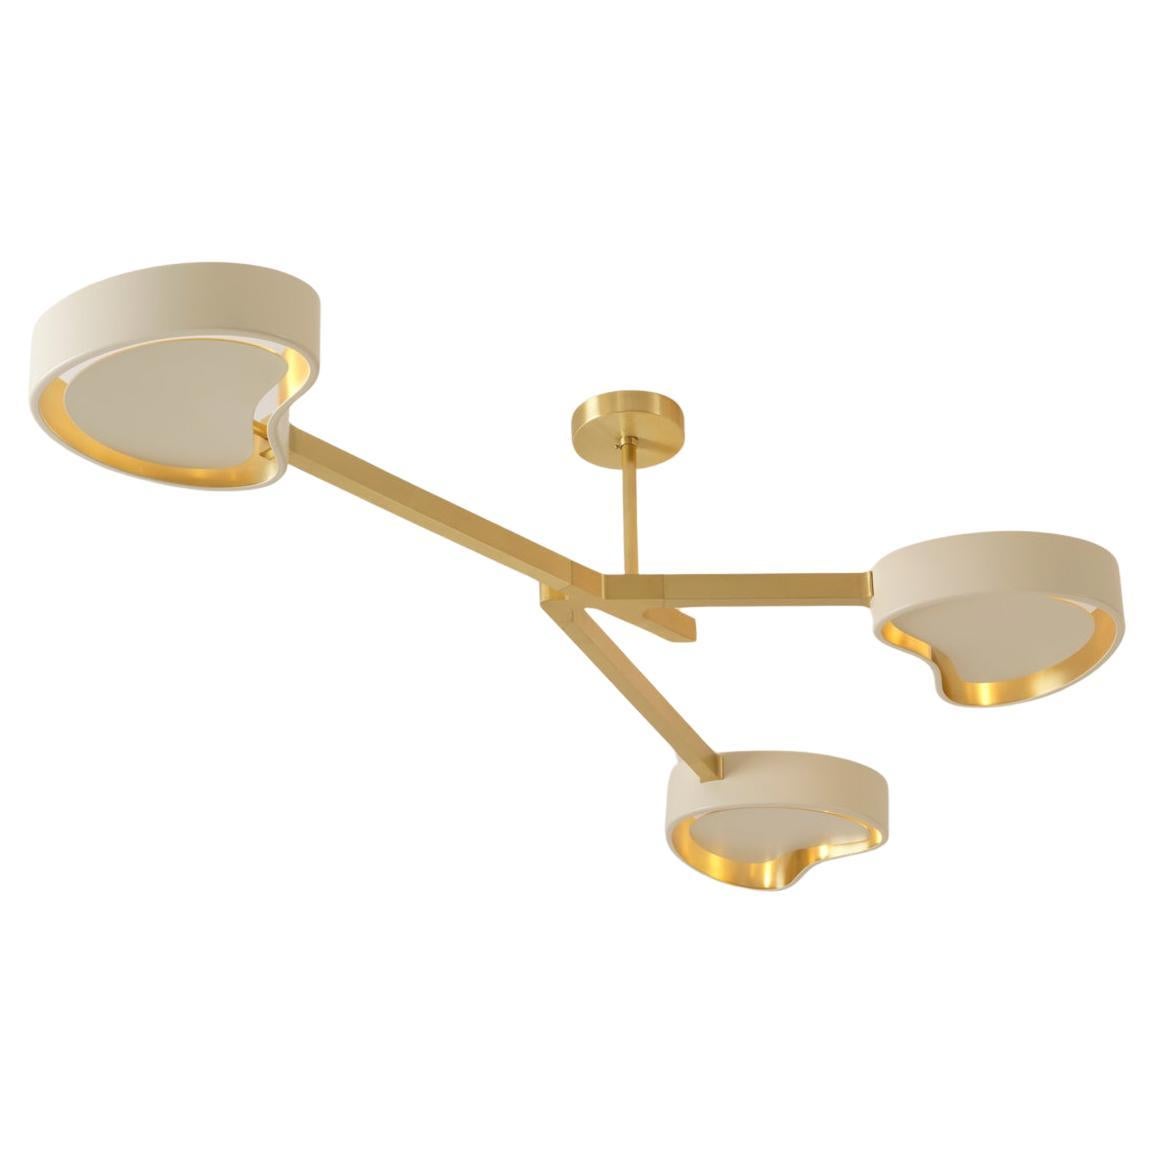 Cuore N.3 Ceiling Light by Gaspare Asaro. Satin Brass and Sand White For Sale